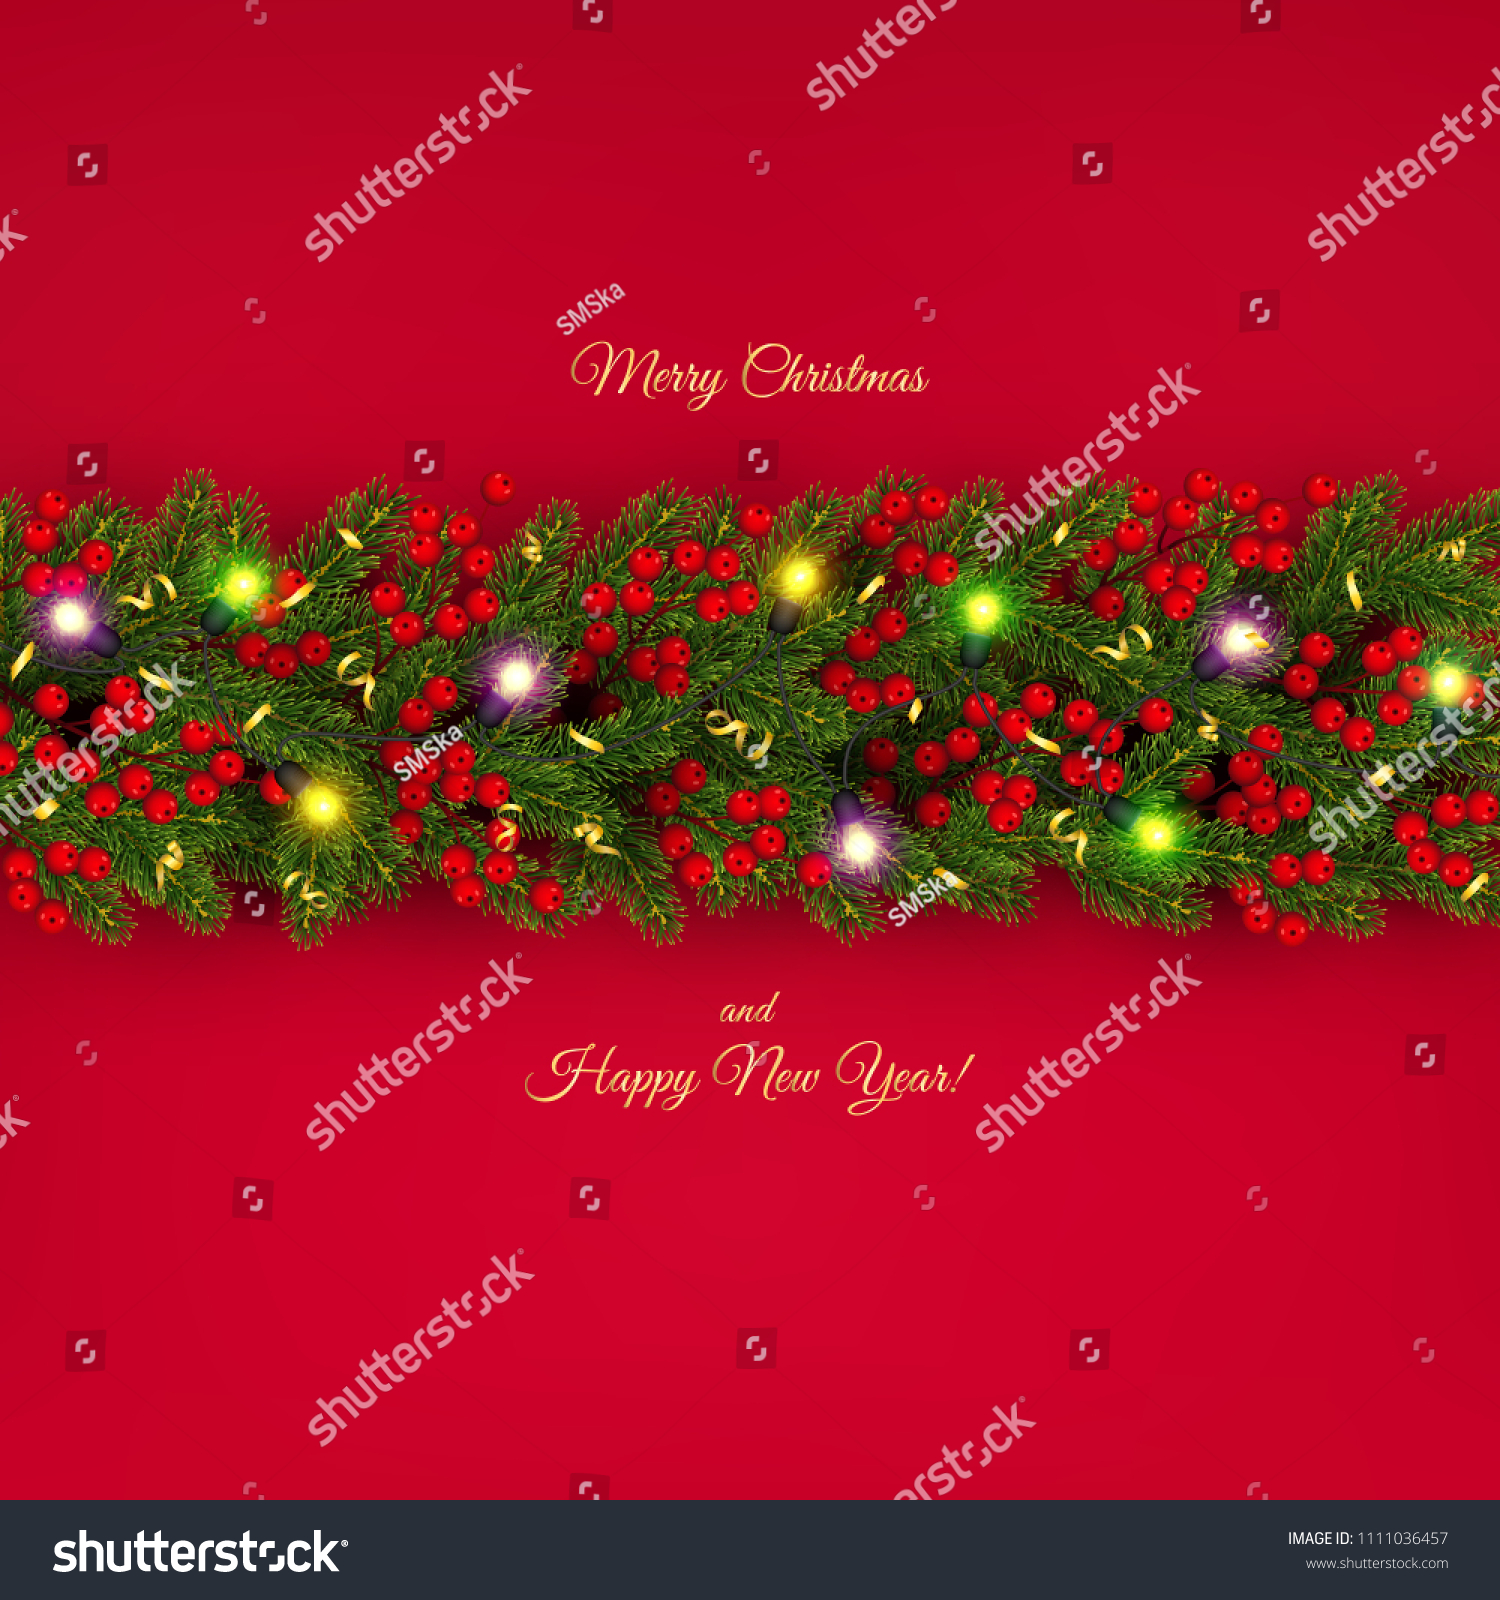 Christmas and New Year banner of realistic branches of Christmas tree, garland with glowing light bulbs, holly berries, serpentine Festive background Vector illustration #1111036457